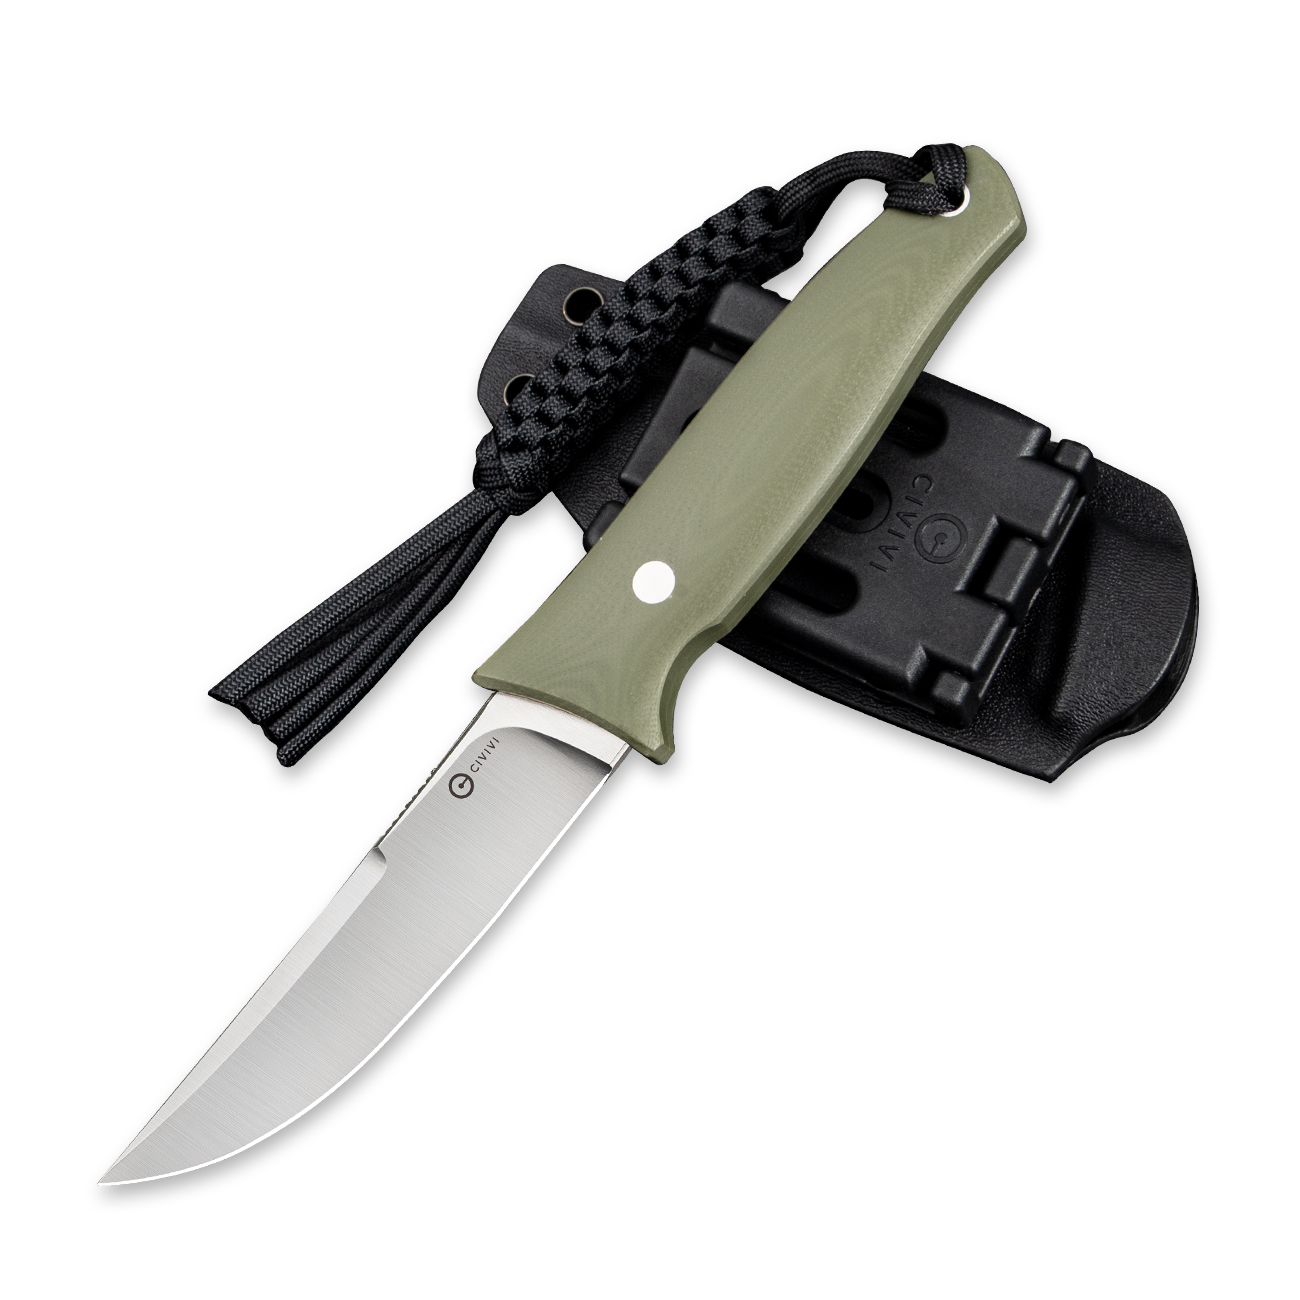 CIVIVI Tamashii Fixed Blade C19046-2 Knife D2 Stainless Steel & OD Green G10 Hunting Knives